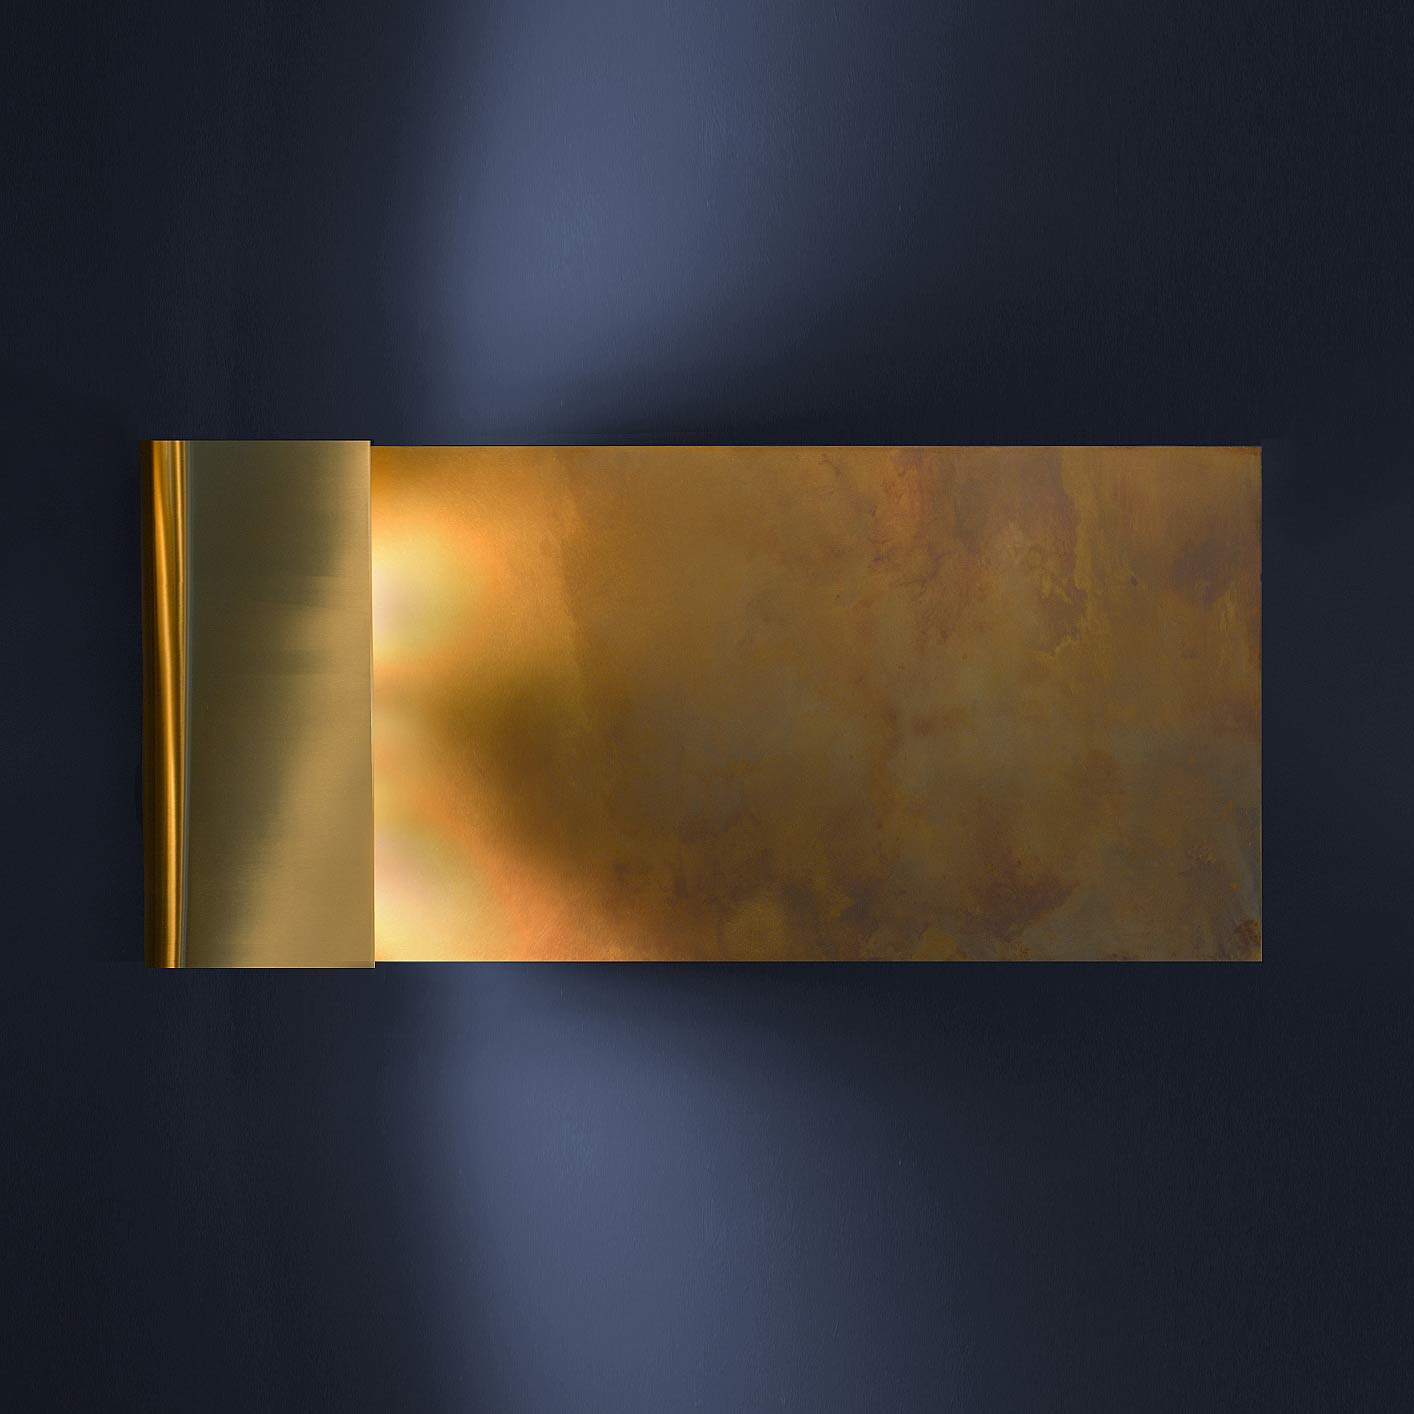 The ARTEM Wall Light in brass can be mounted horizontally or vertically depending on your vision